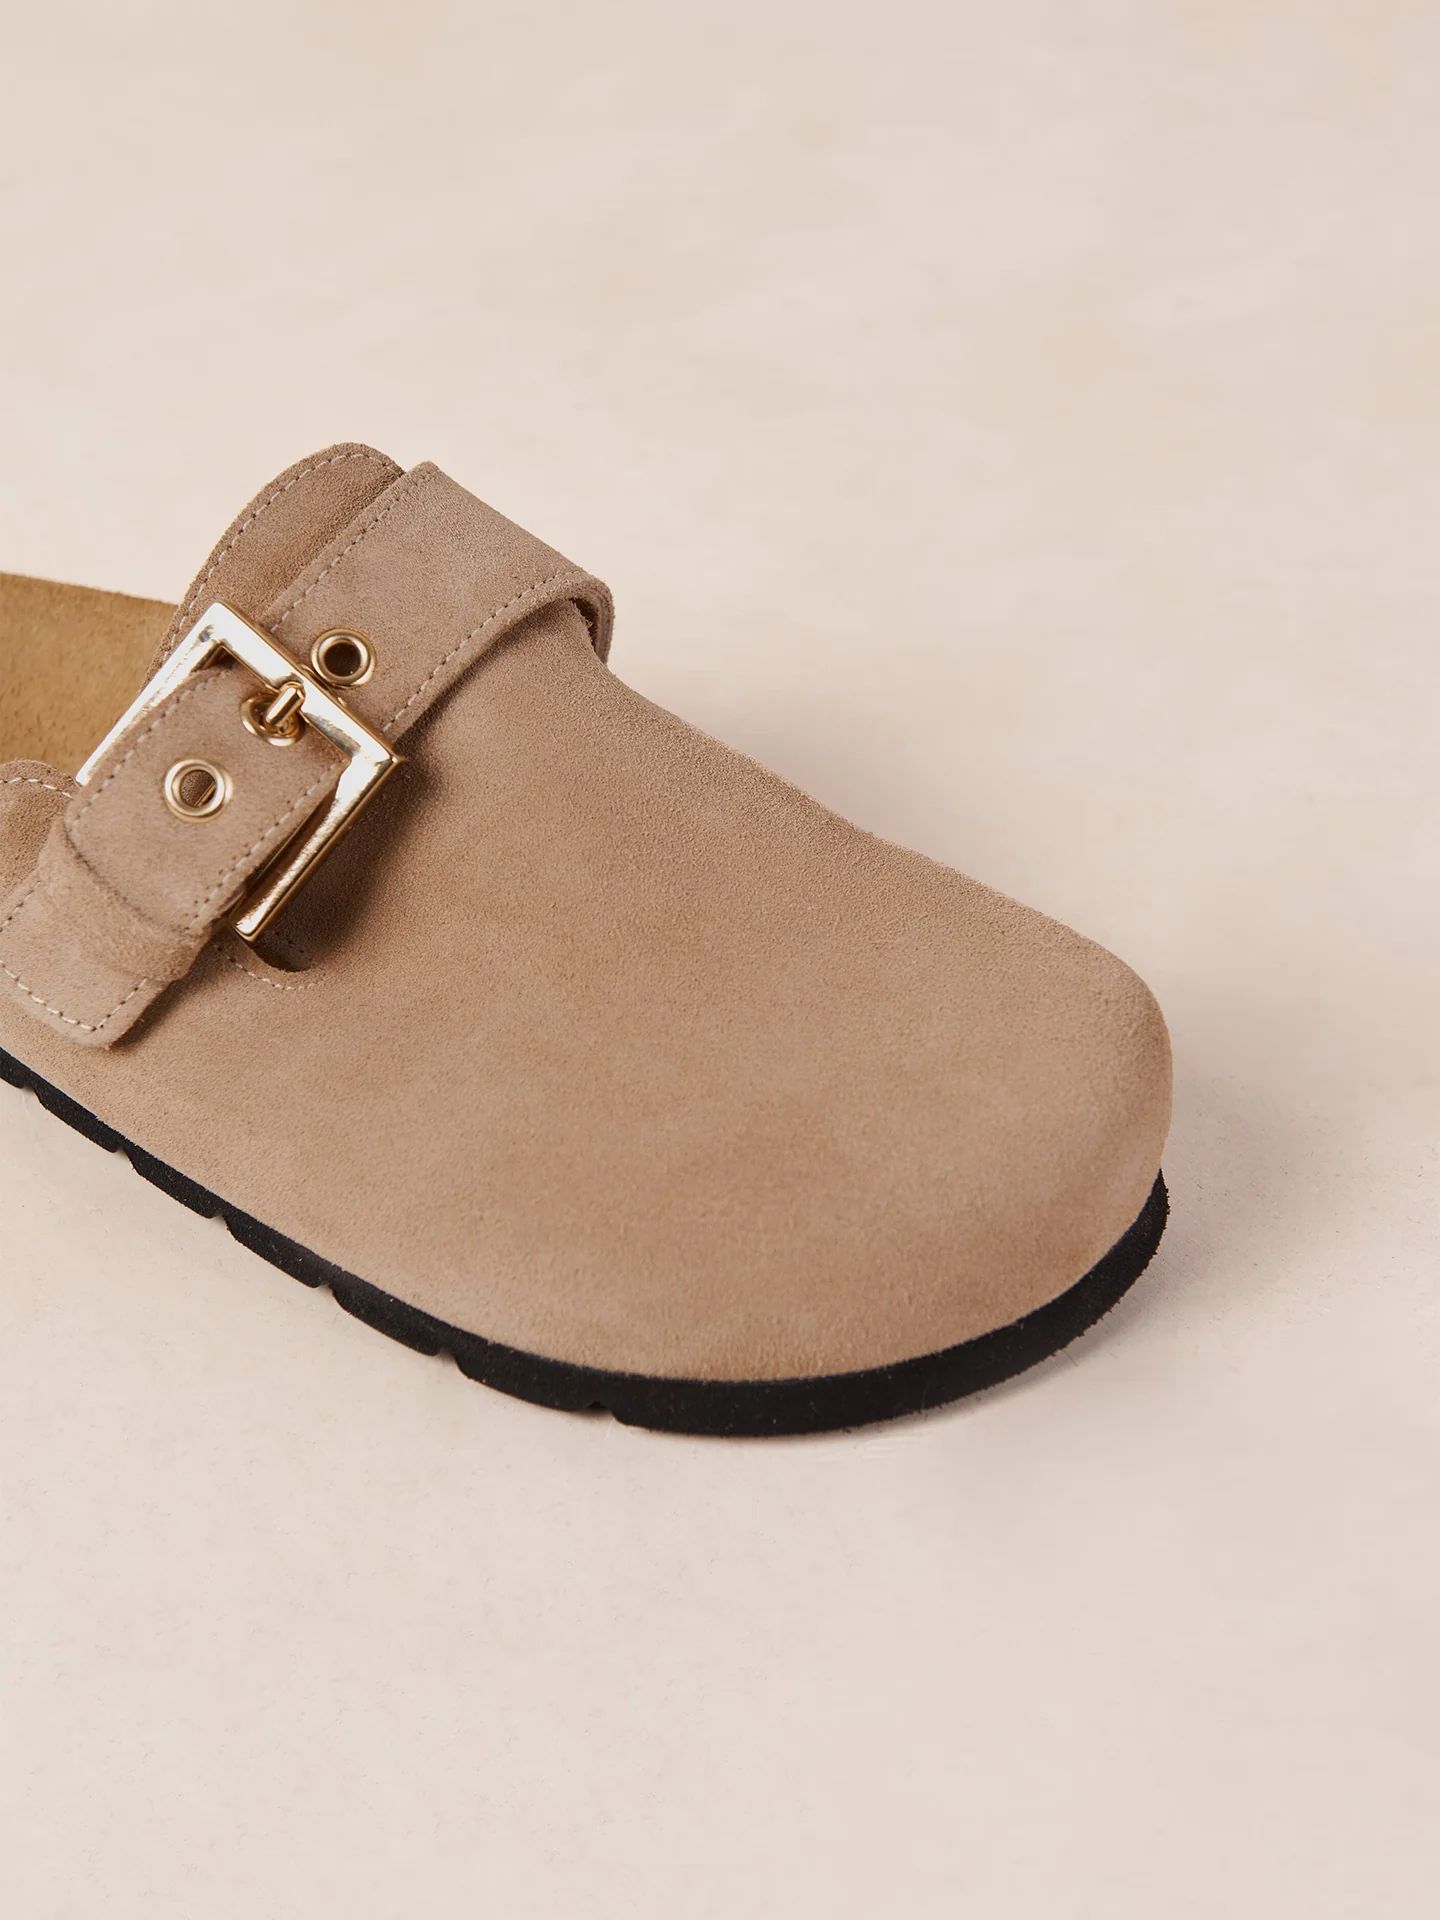 COZY SUEDE MULE - TAUPE LEATHER | Carbon38